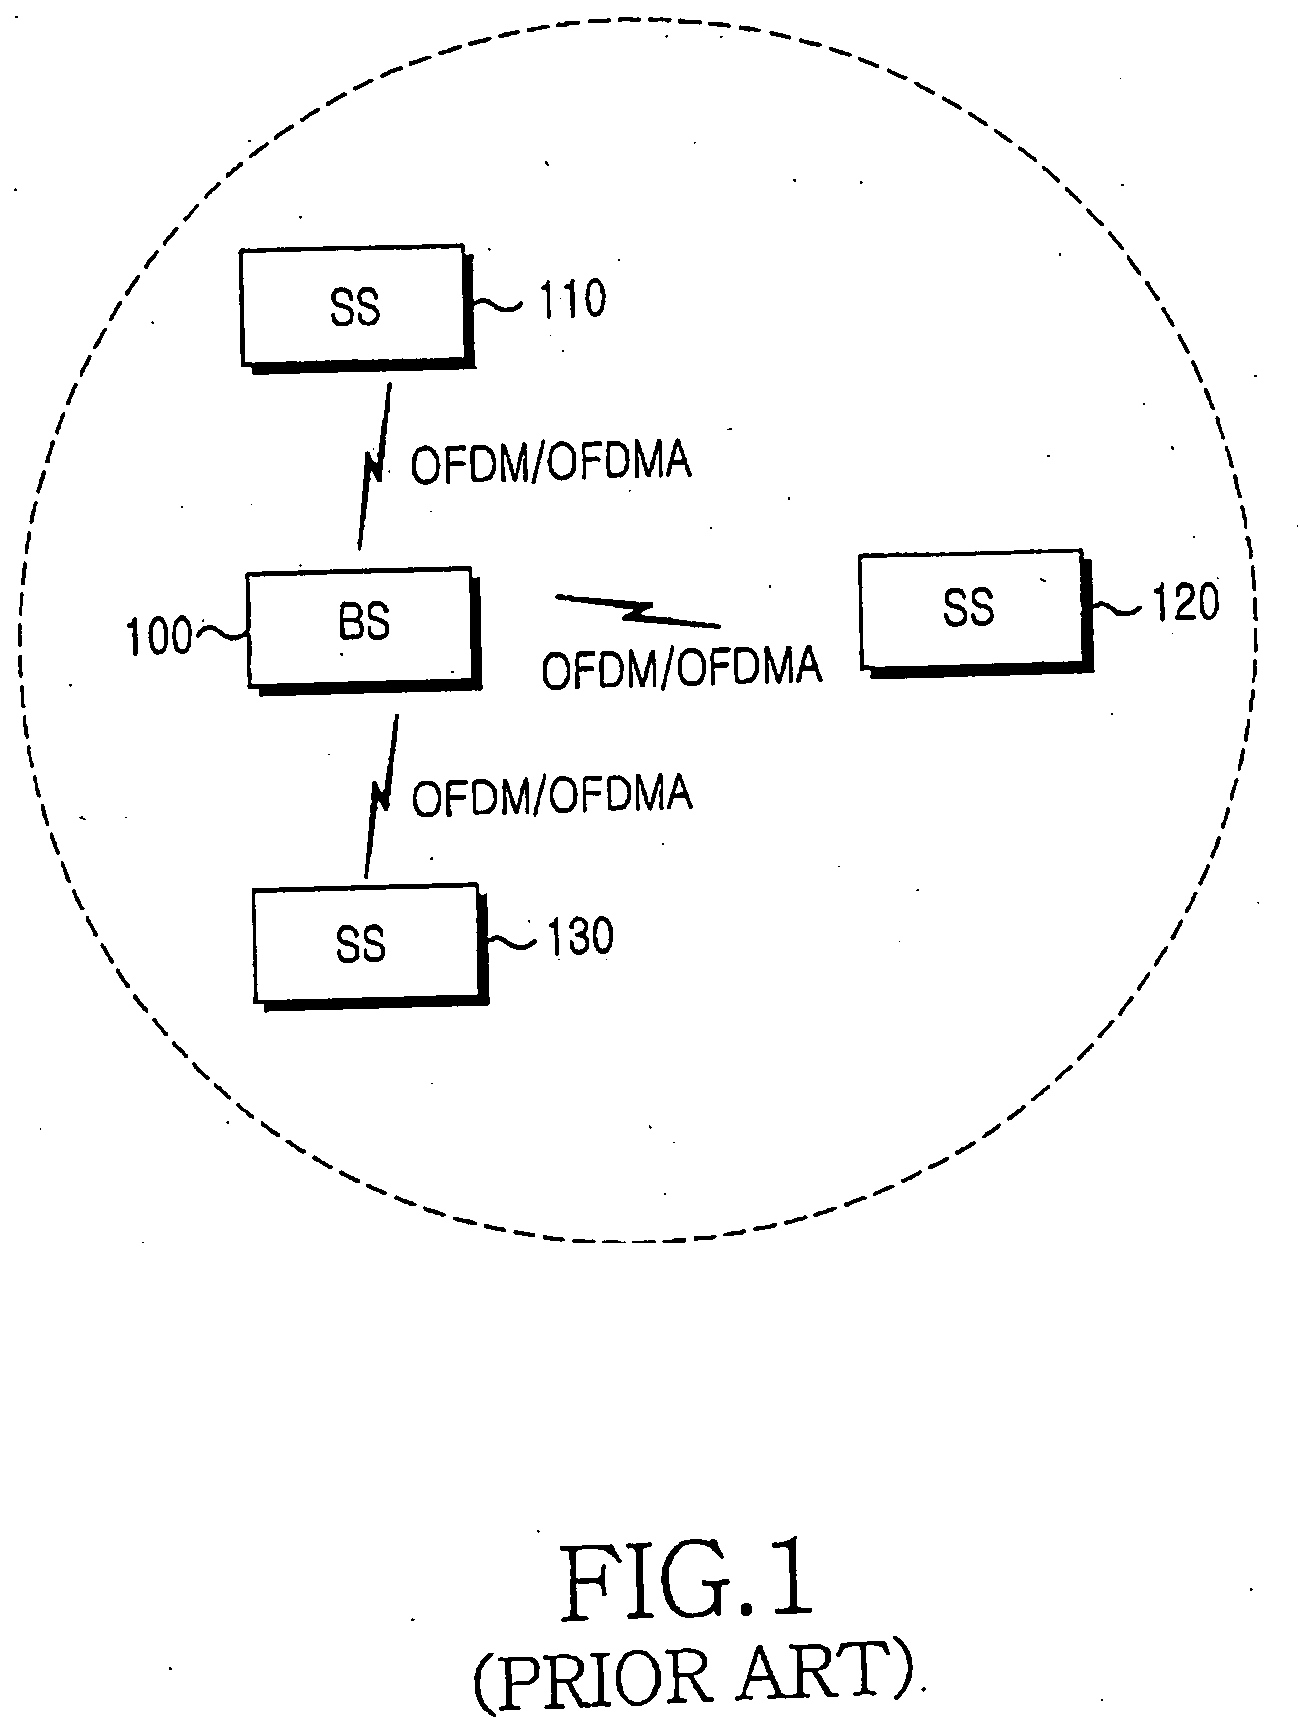 Apparatus and method for cell acquisition and downlink synchronization acquisition in a wireless communication system